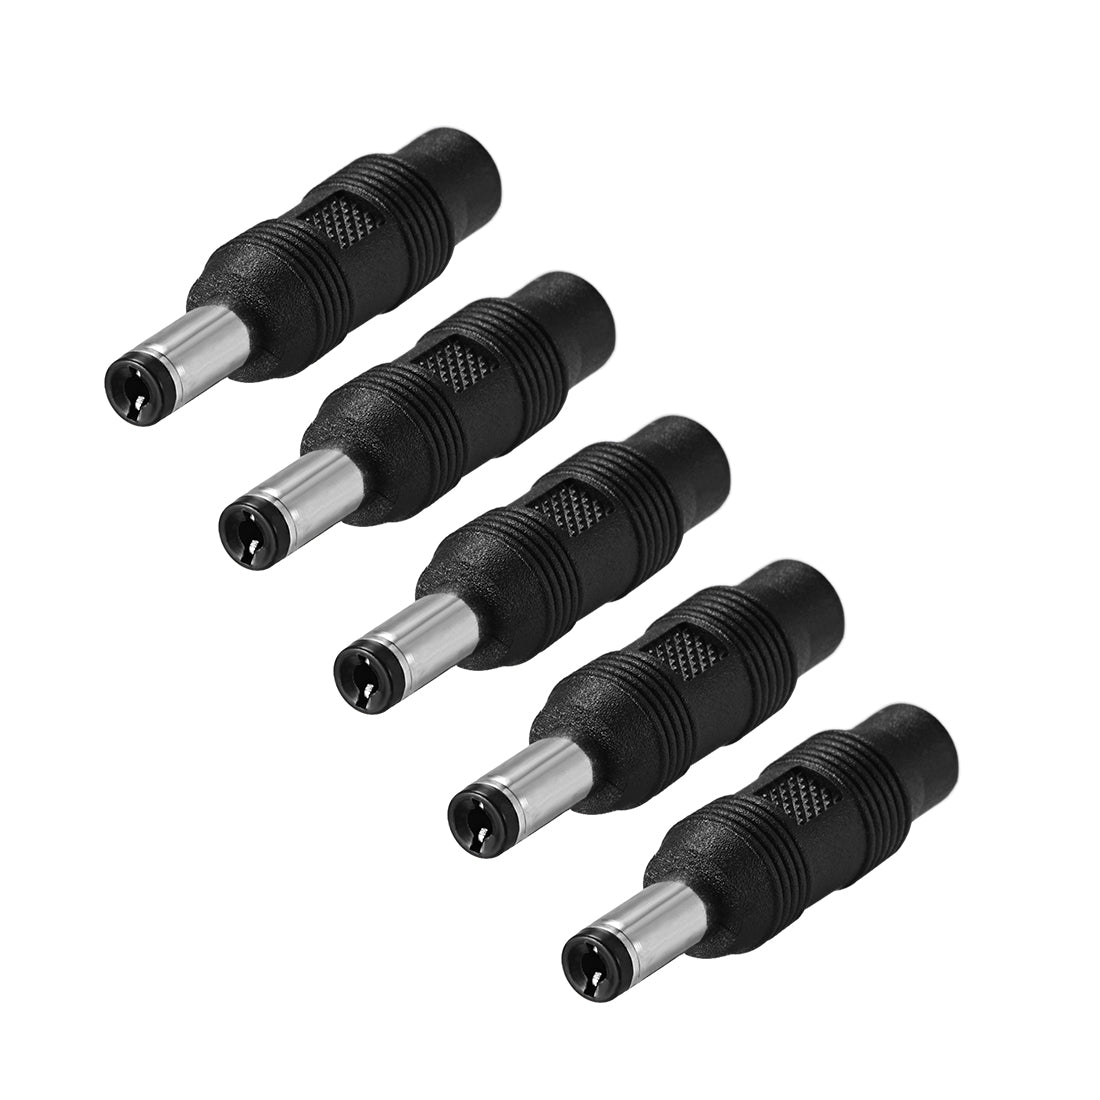 uxcell Uxcell DC Power Converter 5.5mm x 2.1mm Male to 3.5mm x 1.35mm Female Adapter Connector Black 5Pcs